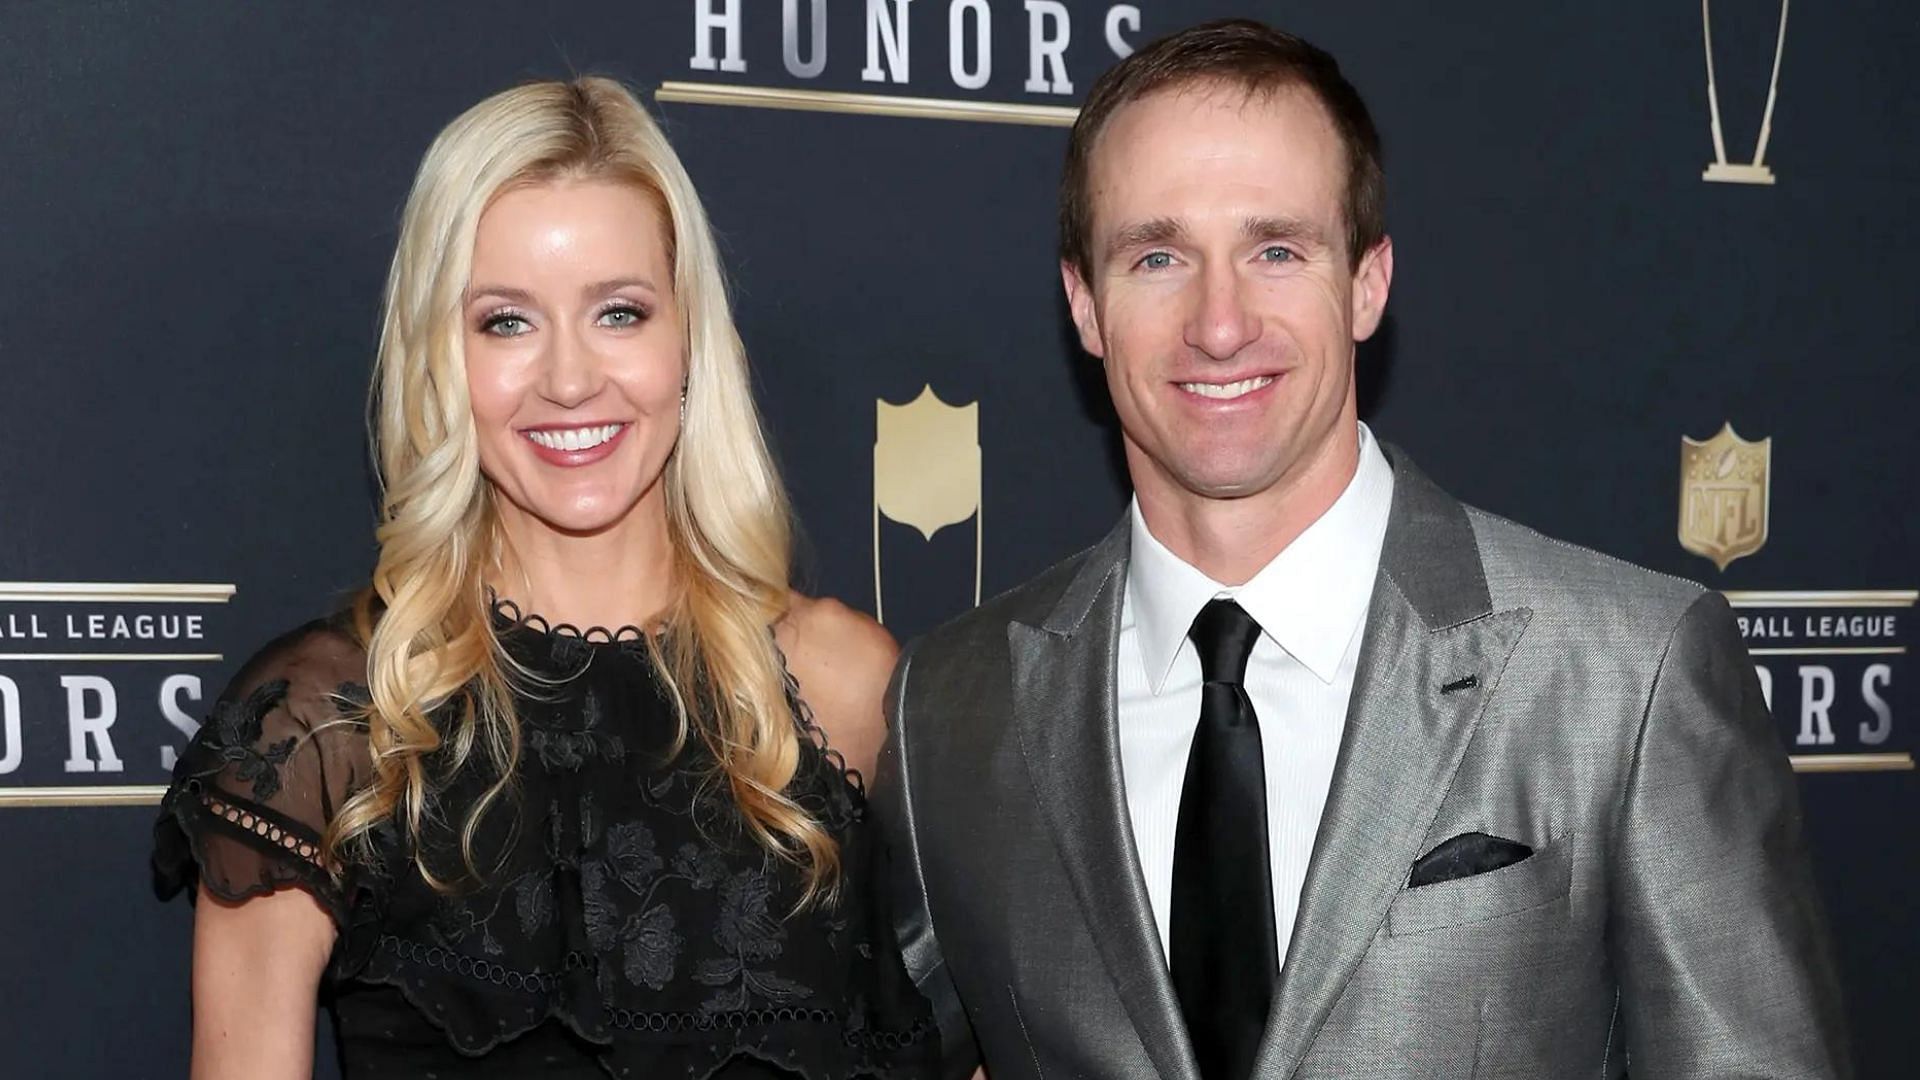 Drew Brees and his endless love for his wife Brittany